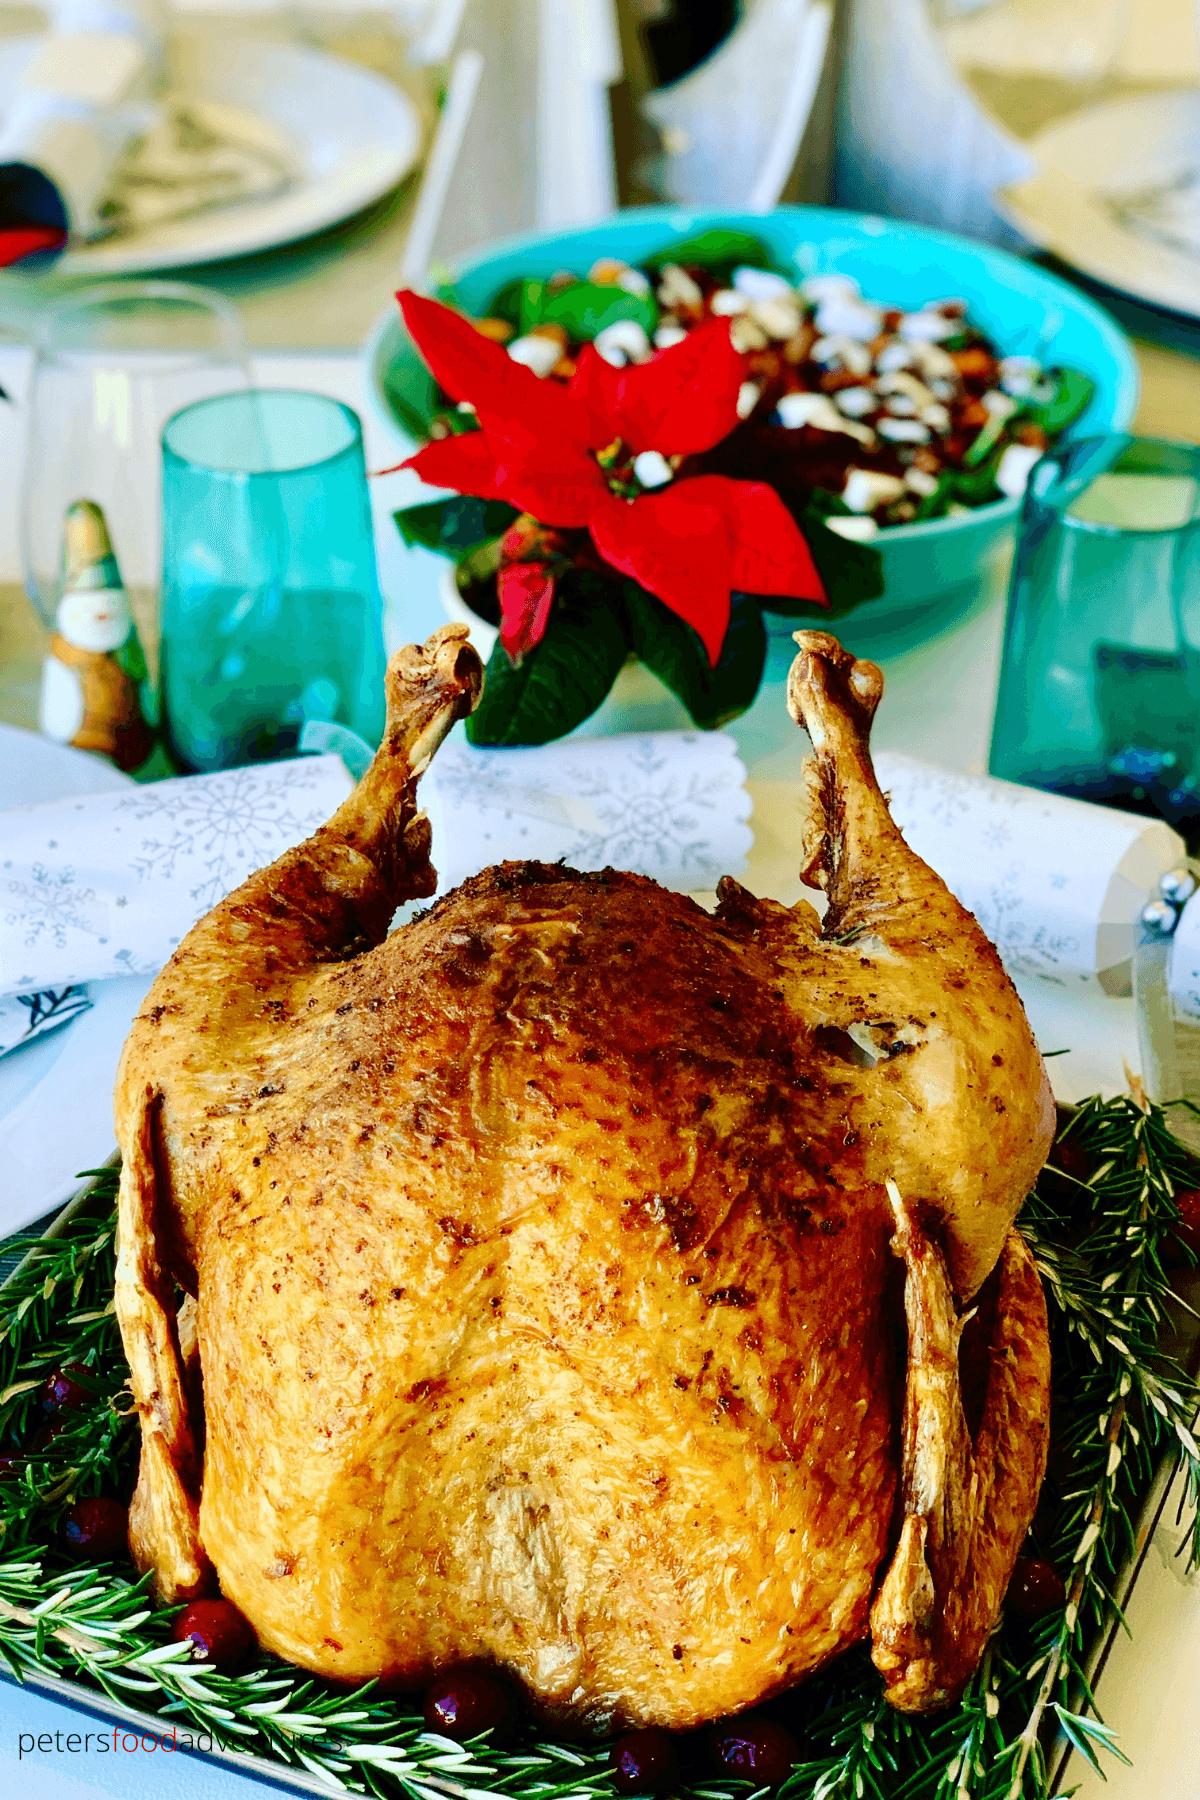 How To Deep Fry a Turkey. A faster way to make Thanksgiving Turkey. Herb butter turkey injection recipe adds flavor throughout with a tasty dry rub. A Christmas Turkey that's Crispy outside, juicy and flavorful inside. Deep Fried Turkey